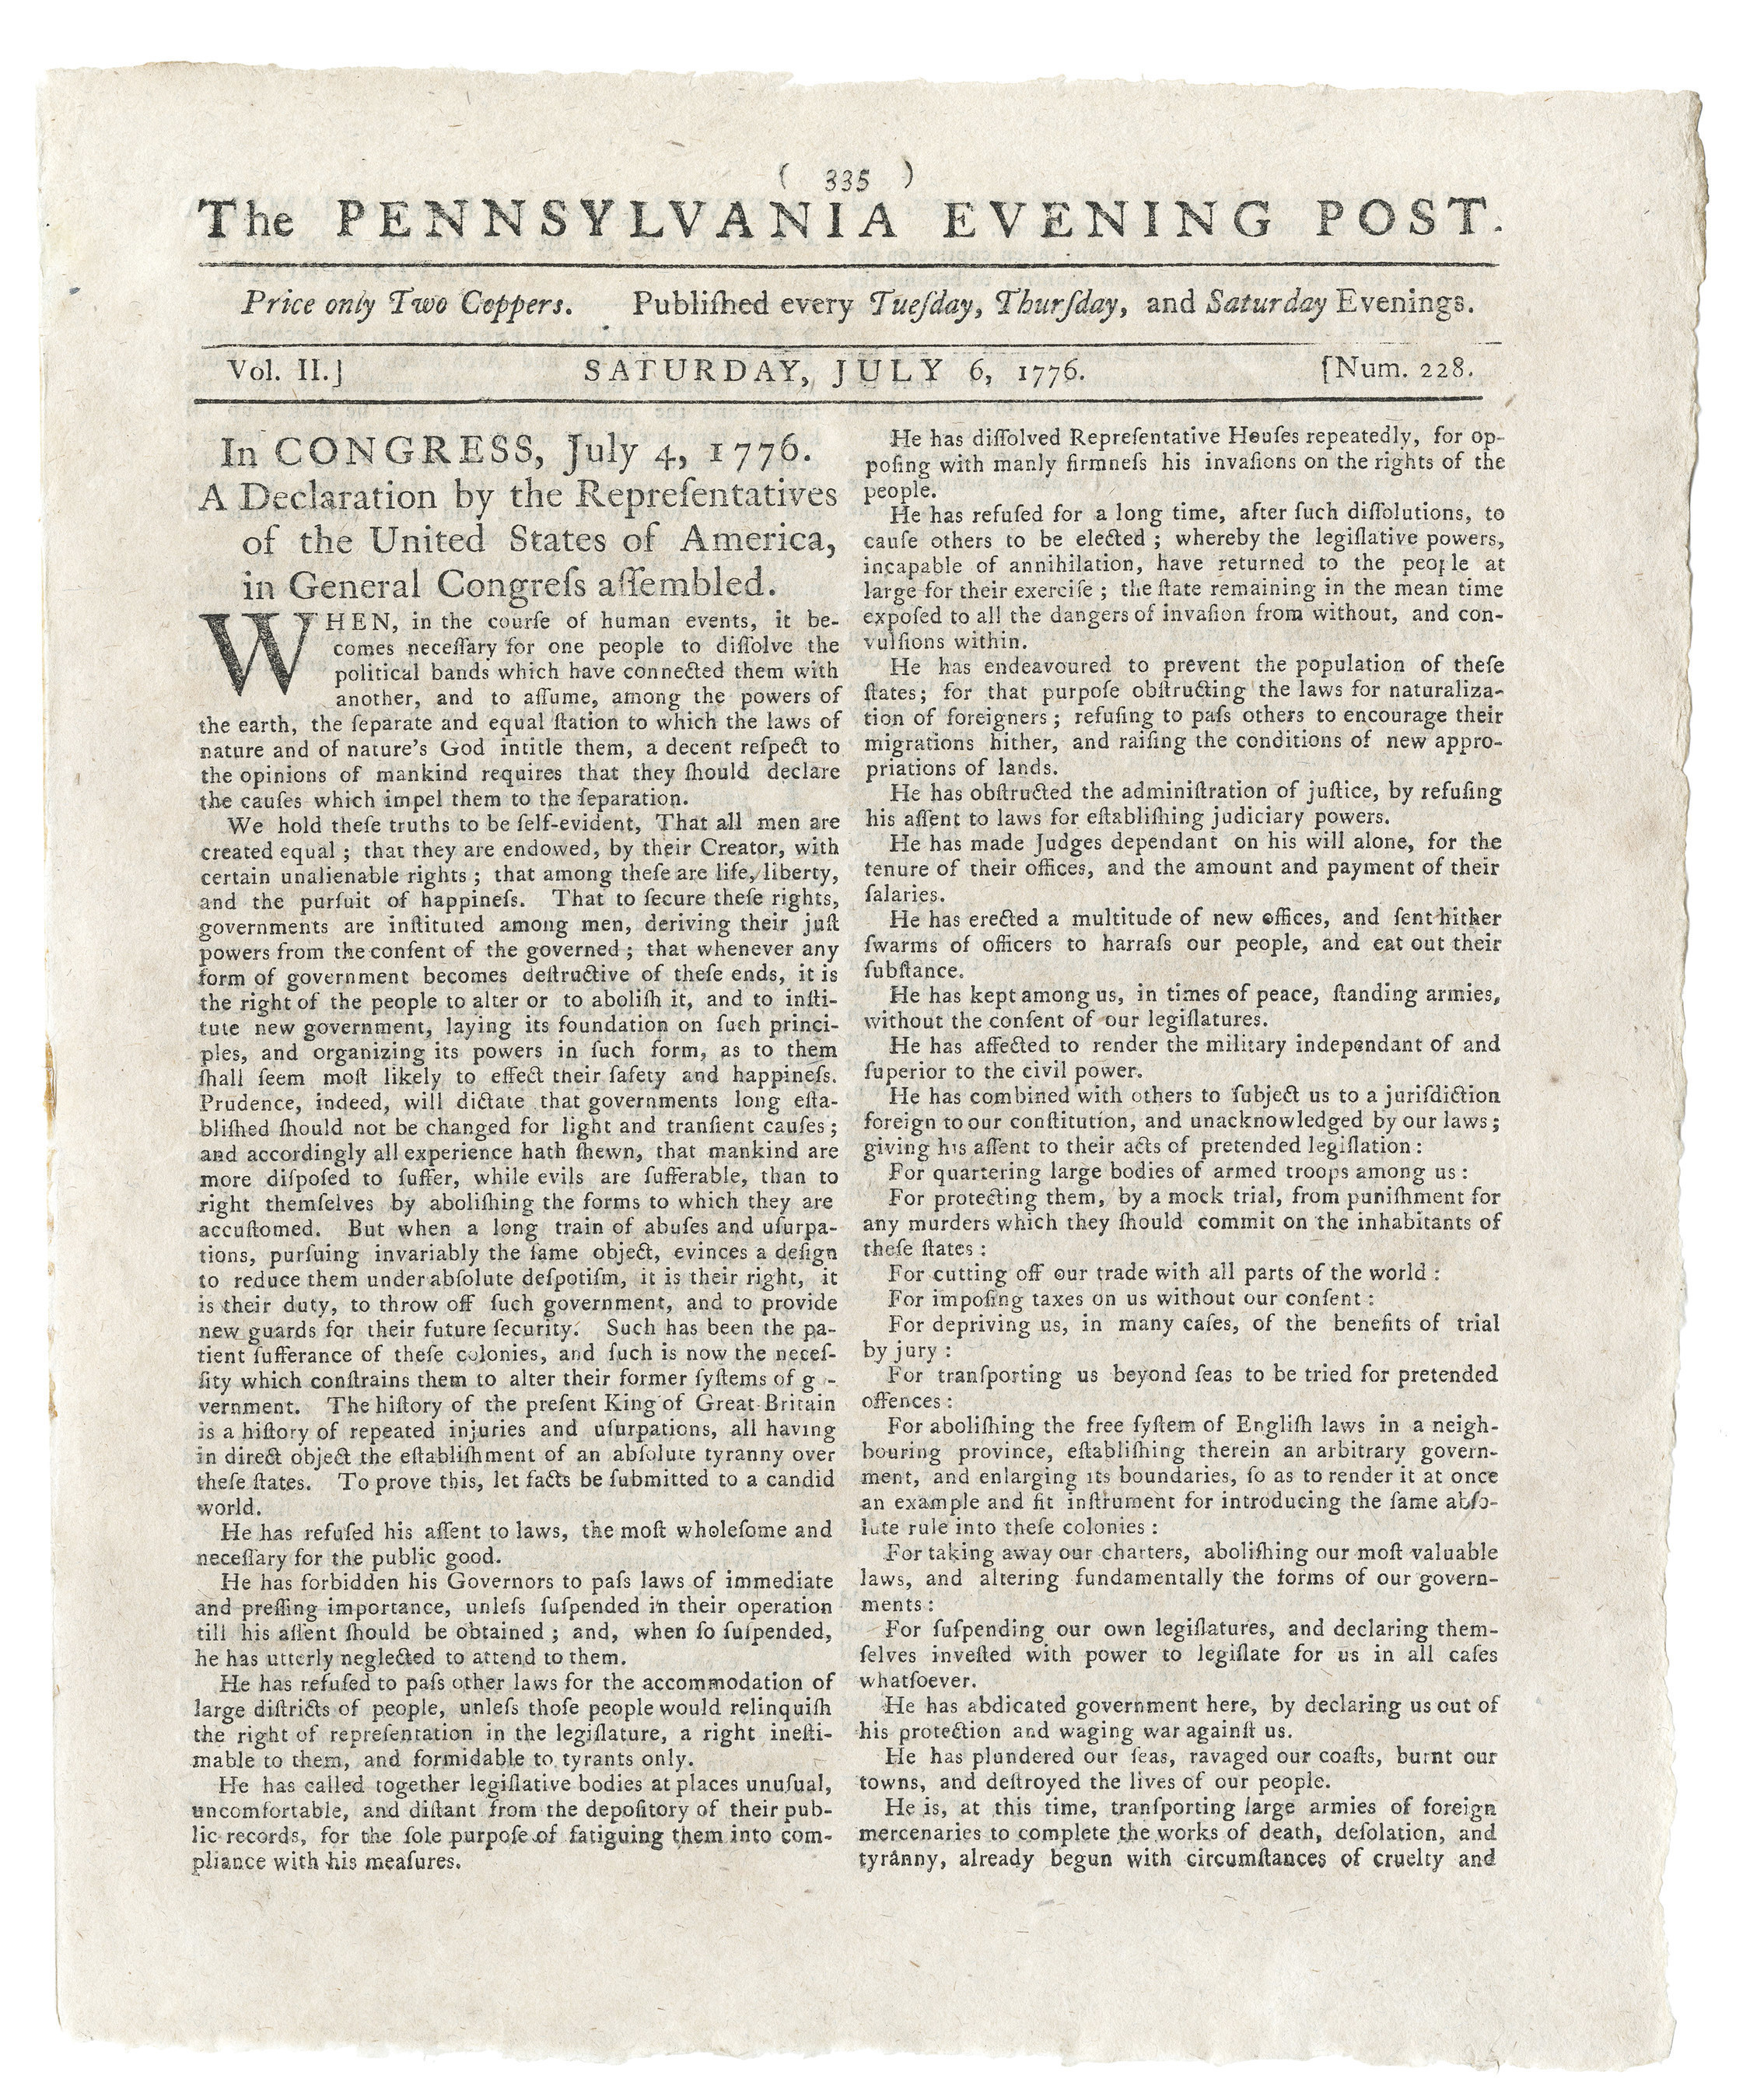 On July 4, 1776, the Continental Congress adopted the Declaration of Independence. Two days later, The Pennsylvania Evening Post became the first newspaper to publish the declaration. On loan to the Newseum from David M. Rubenstein, it is one of only 19 known copies of the historic newspaper. Publisher Benjamin Towne scooped his competitors because he was one of the few Colonial printers who published three days a week, rather than once a week. This rare printing shows the declaration as many Americans first saw it -- as front-page news.